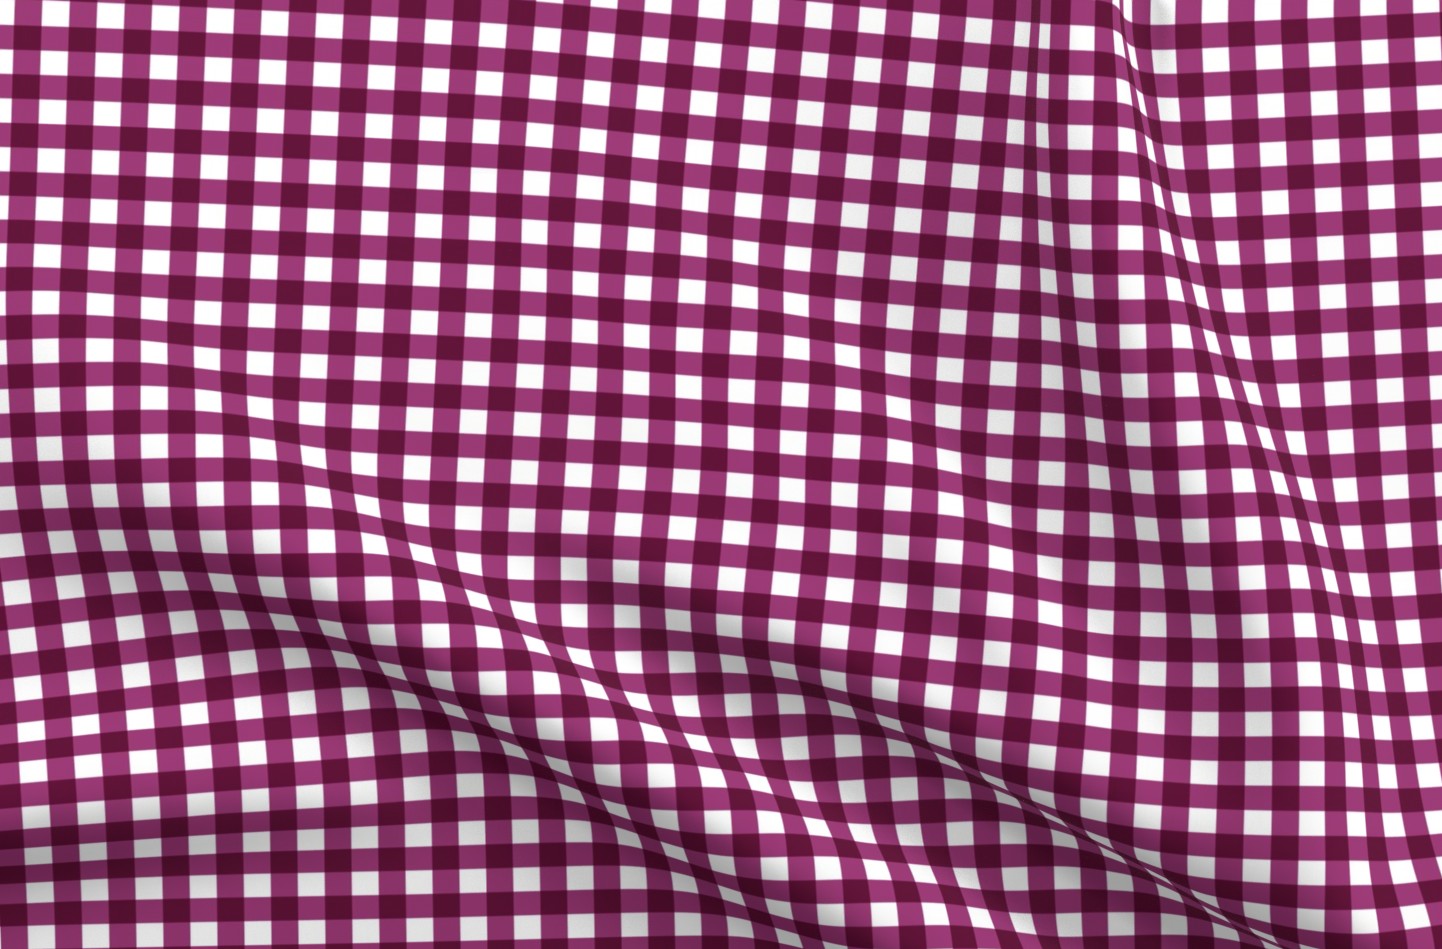 Gingham Style Berry Large Straight Printed Fabric by Studio Ten Design